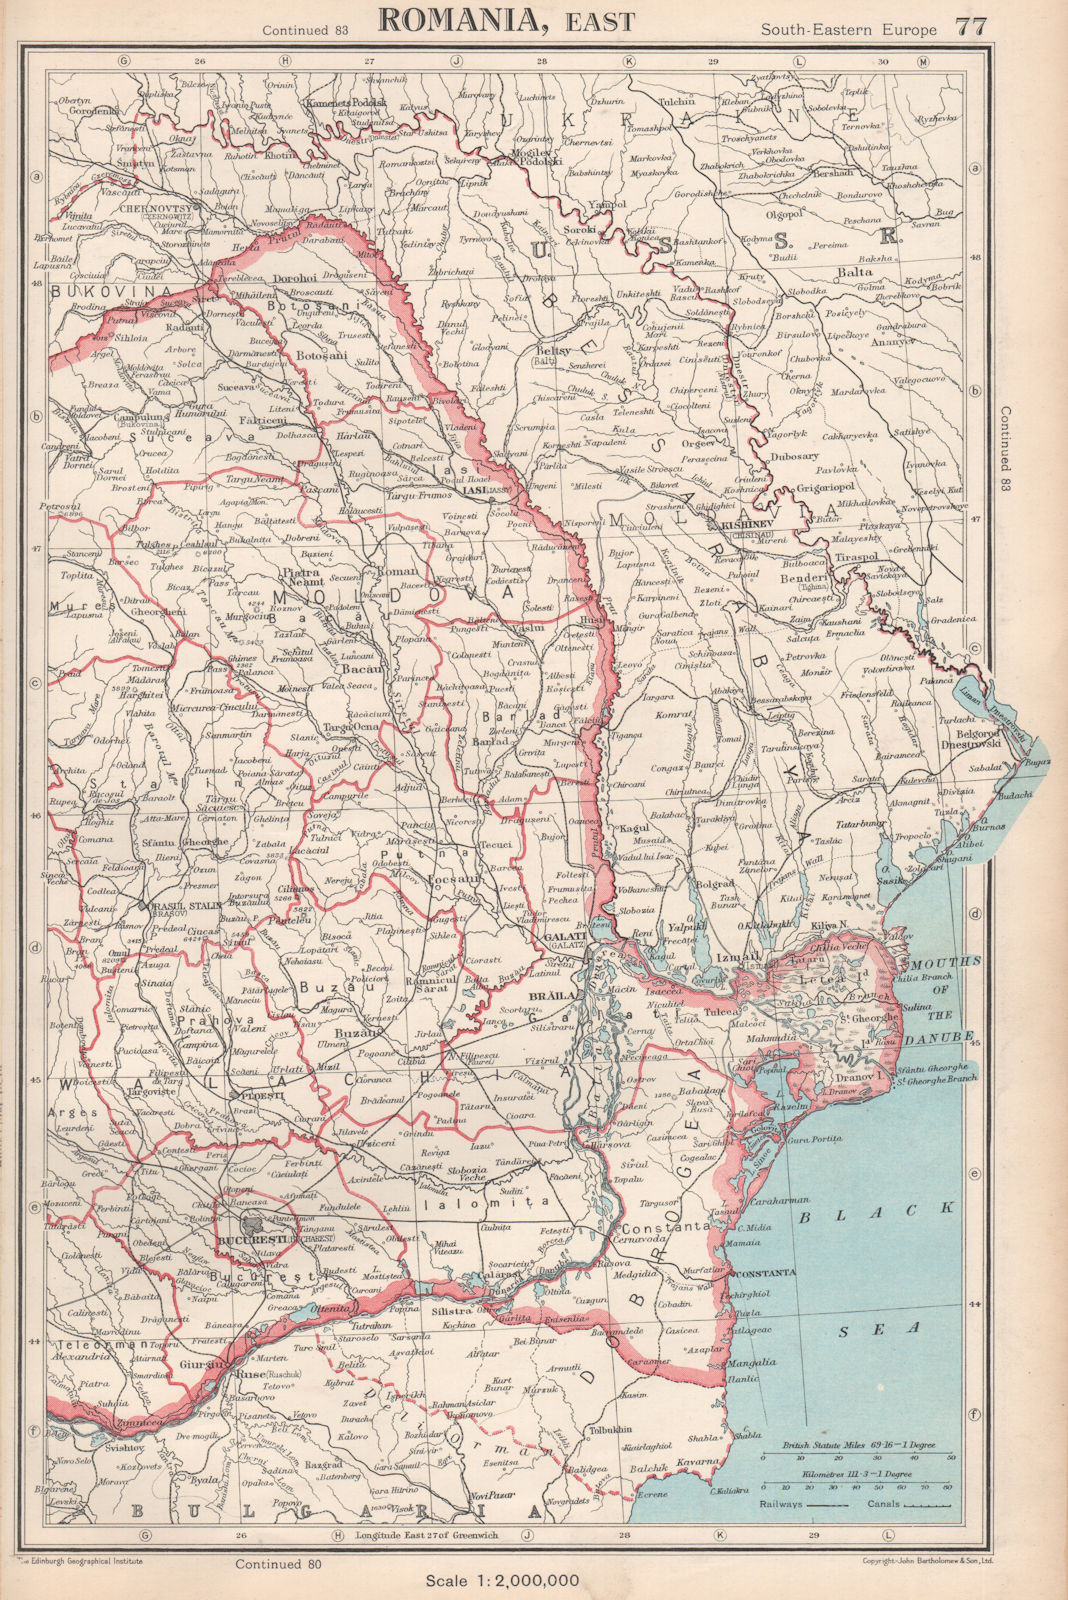 ROMANIA EAST. showing judeţ/judets/counties. BARTHOLOMEW 1952 old vintage map